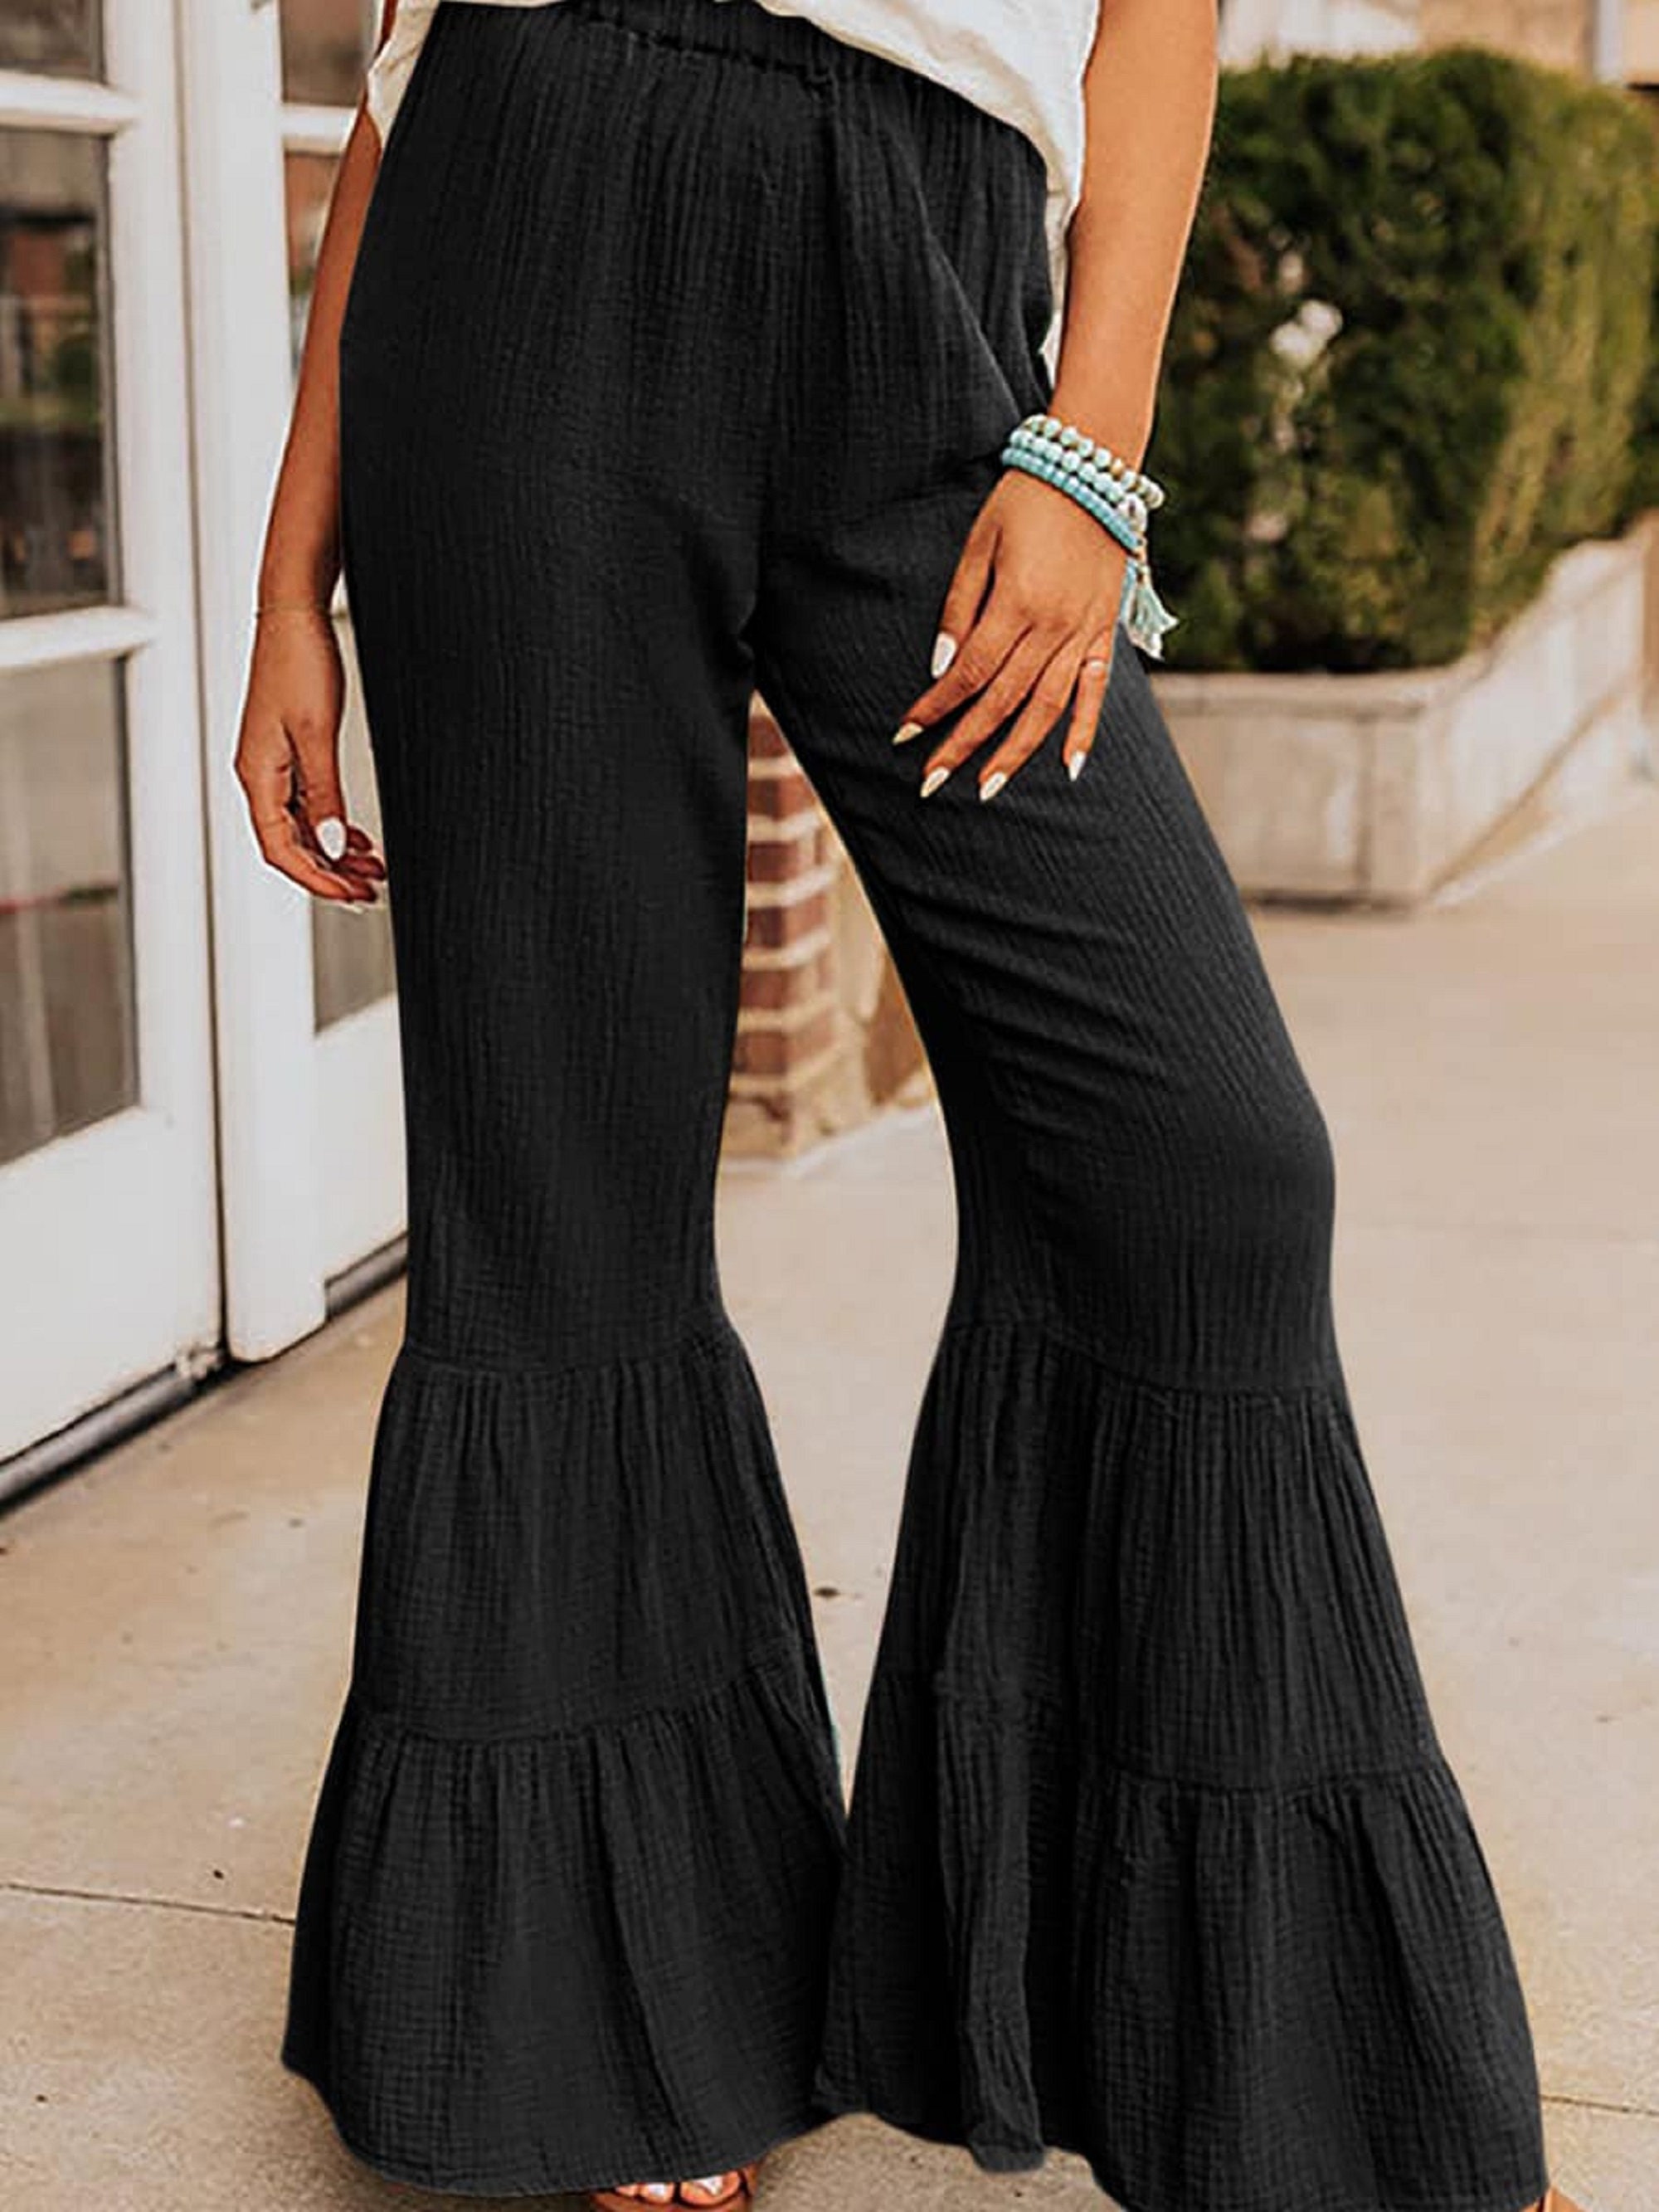 Trending: How to wear black bell bottom flares | Black bell bottoms outfit, Black  bell bottoms, Bell bottoms outfit